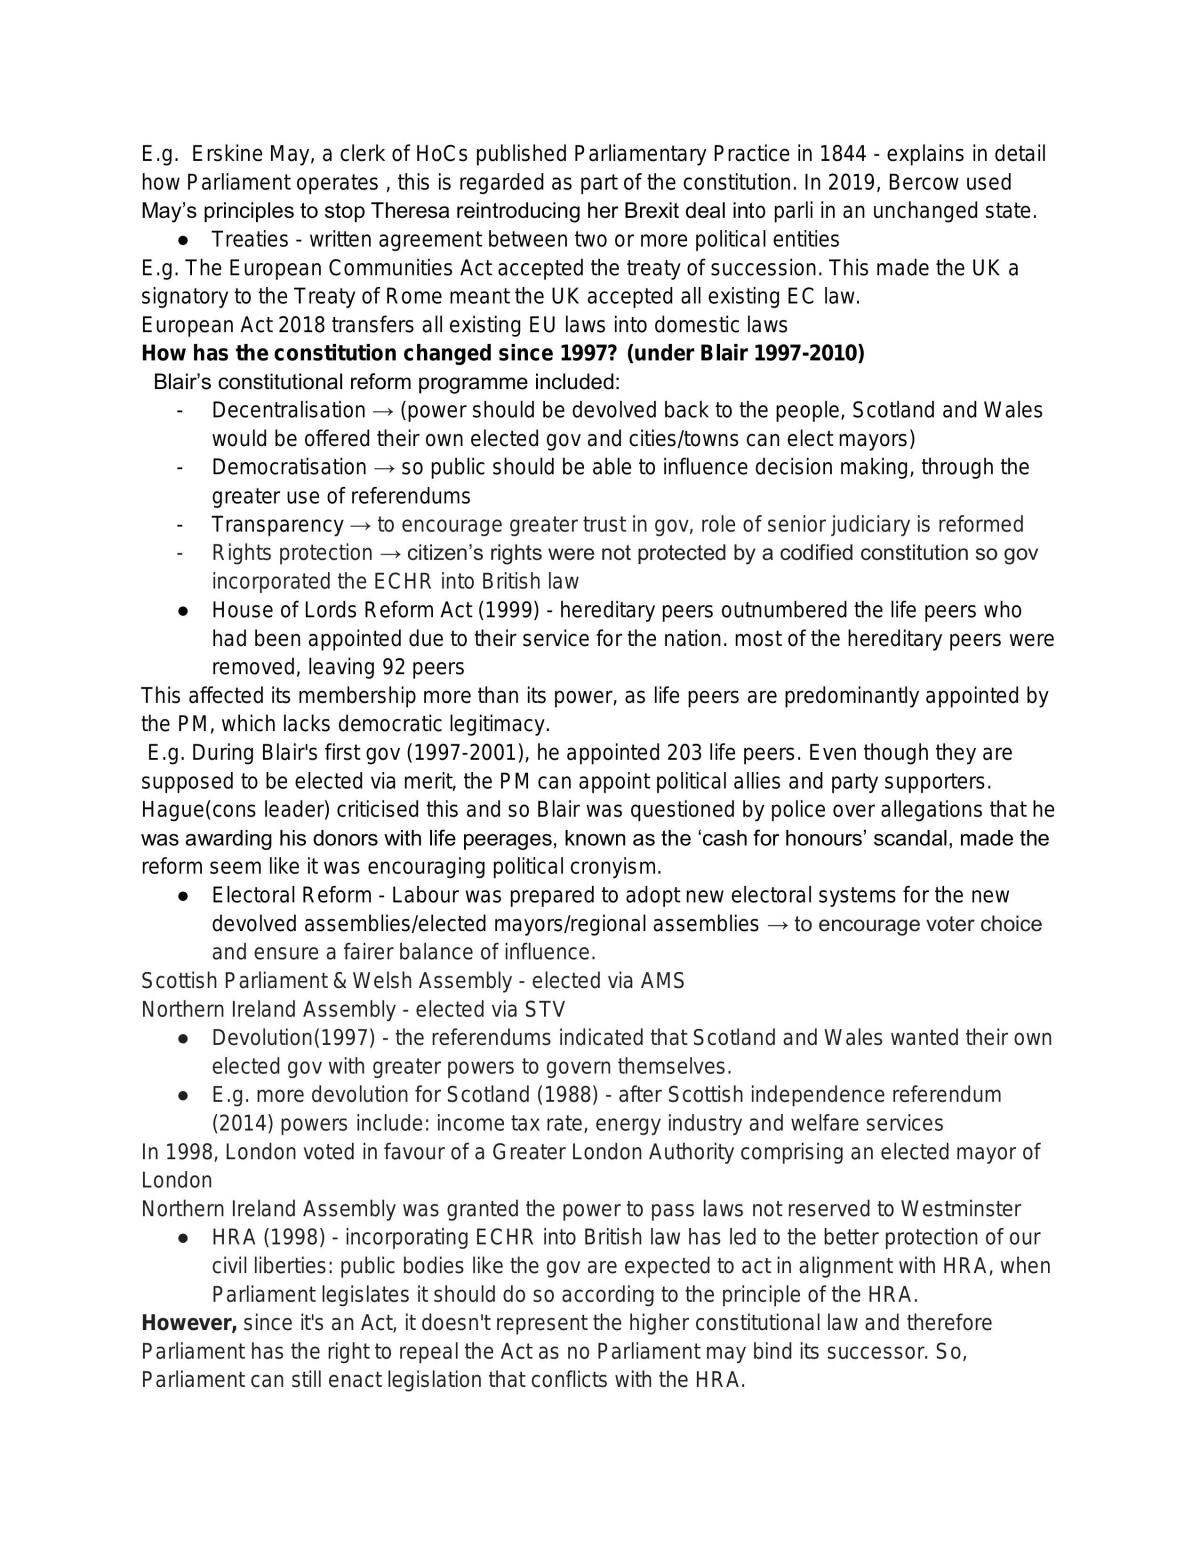 UK constitution - Page 2